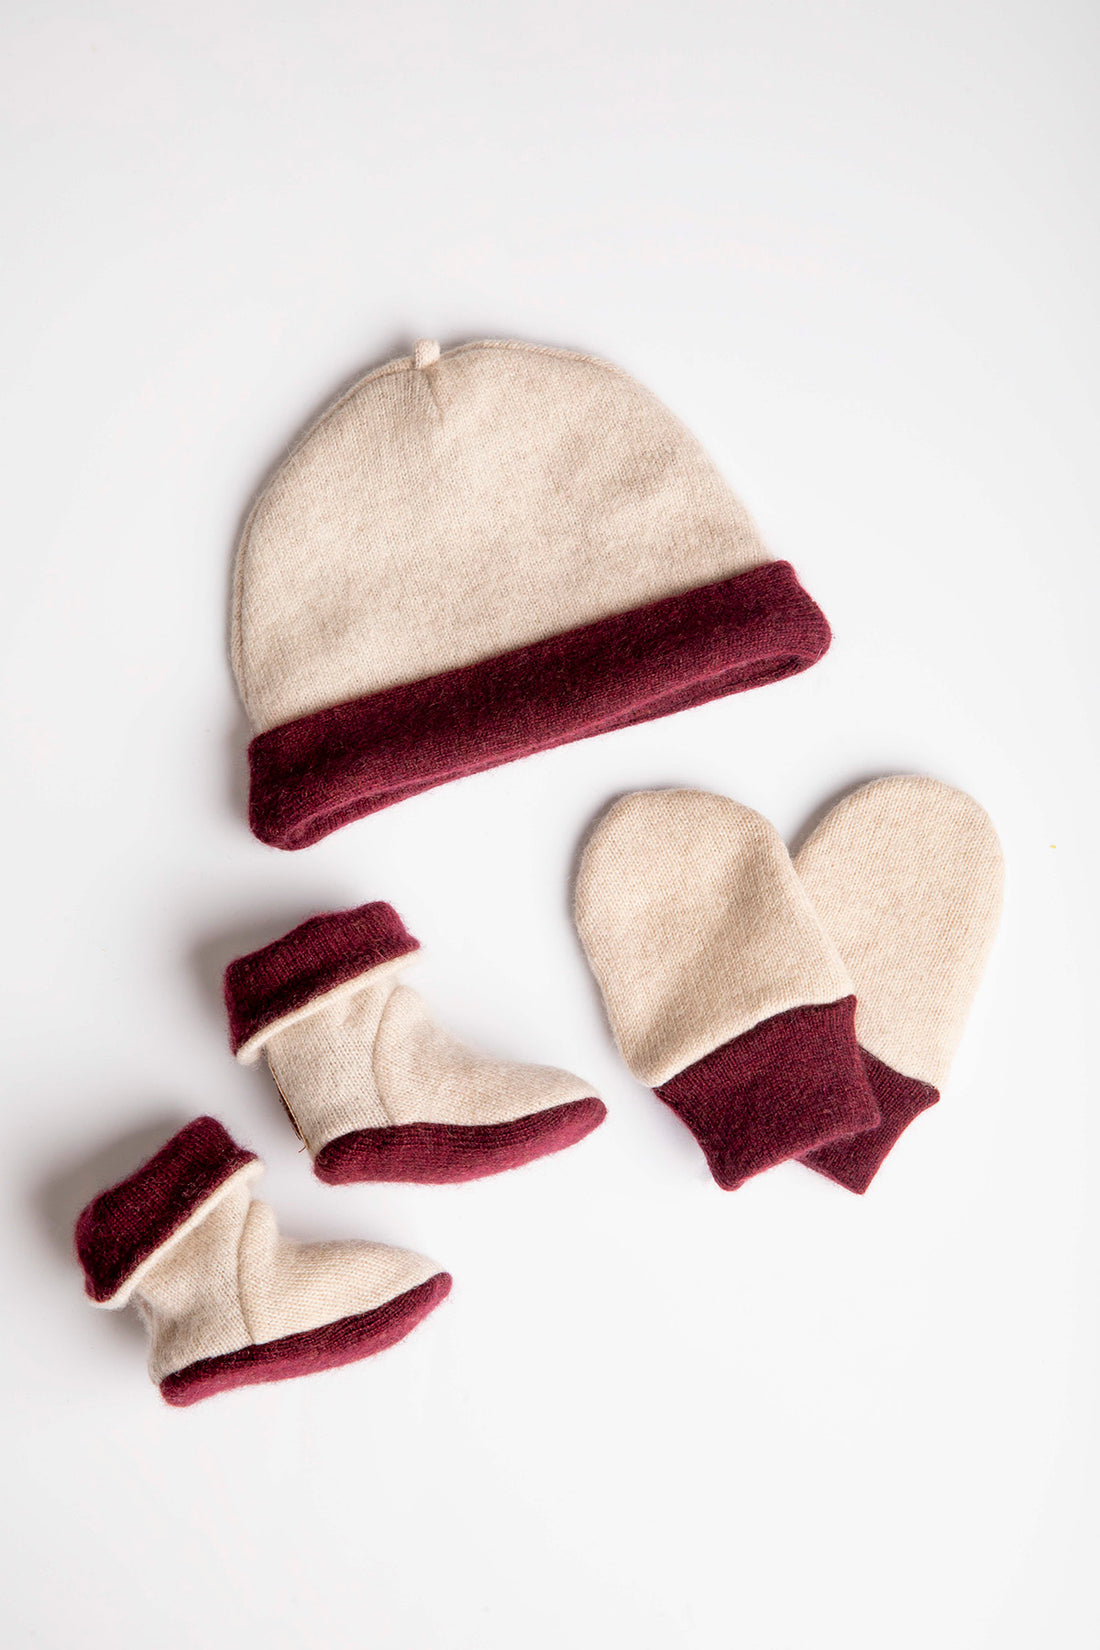 Red Baby Set - Mittens, Booties and Hat